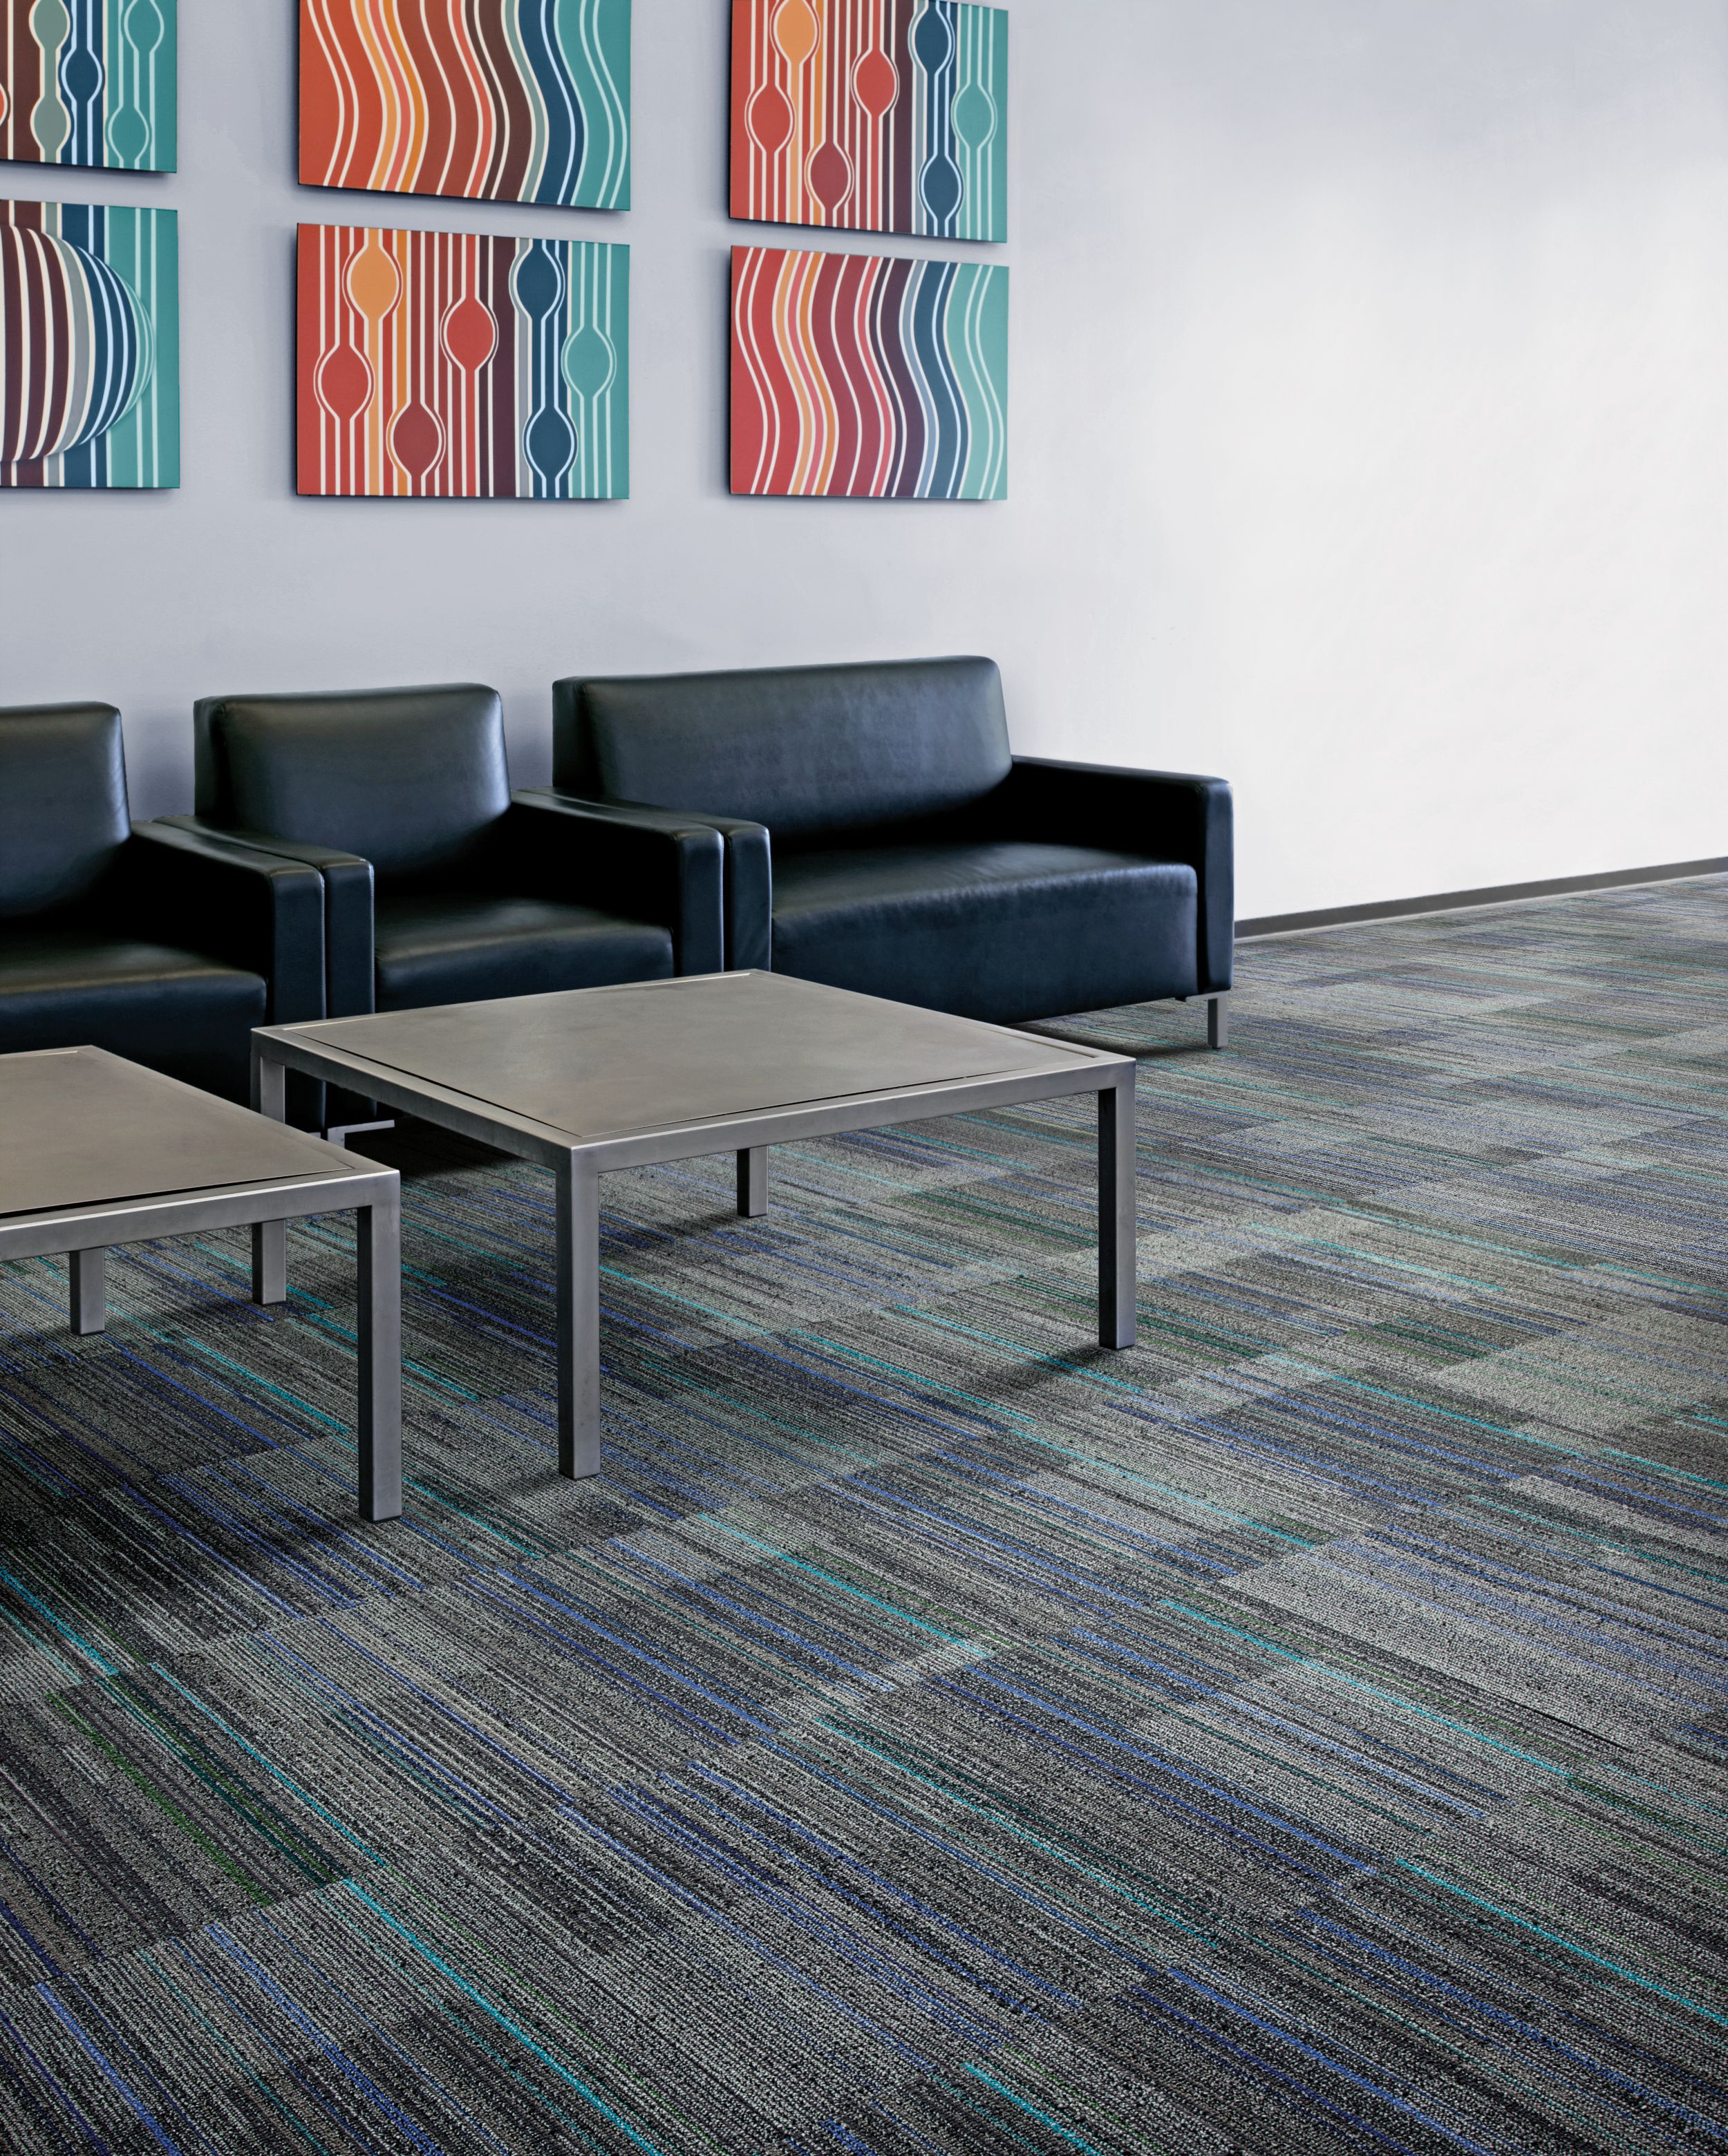 Interface Straight Edge carpet tile in waiting area with table and chairs numéro d’image 1